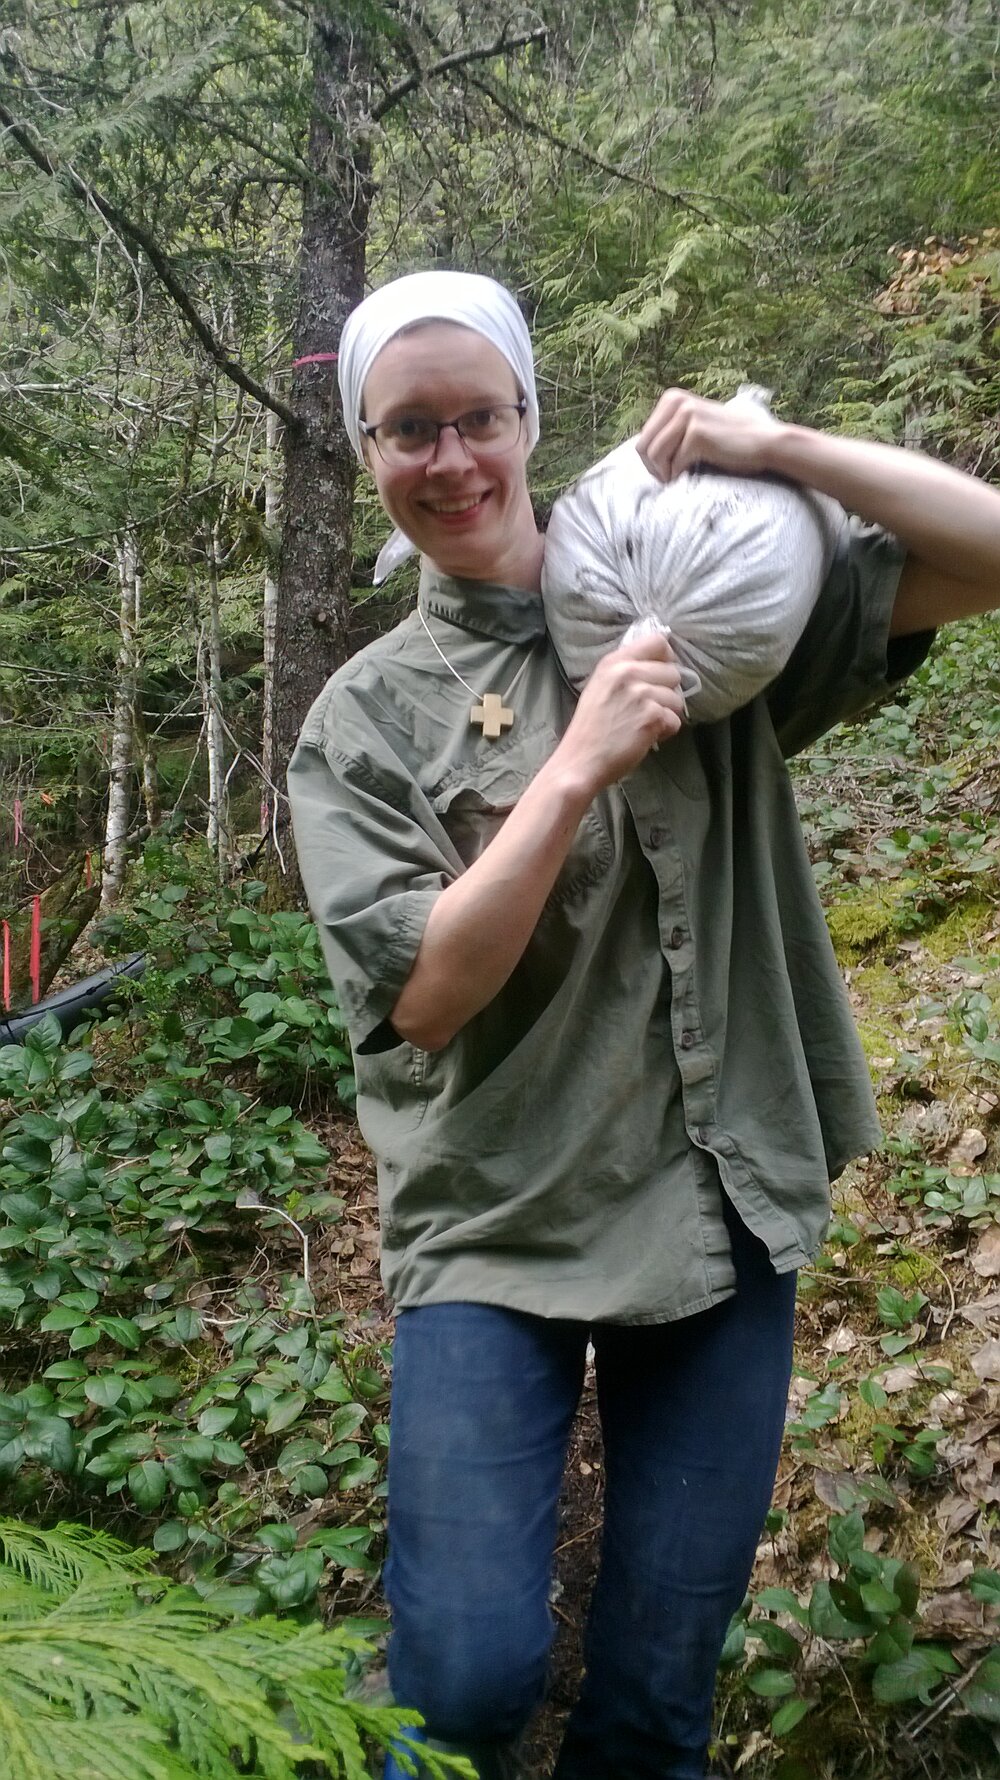  And, the “slow way” of carrying in supplies…two good shoulders! 